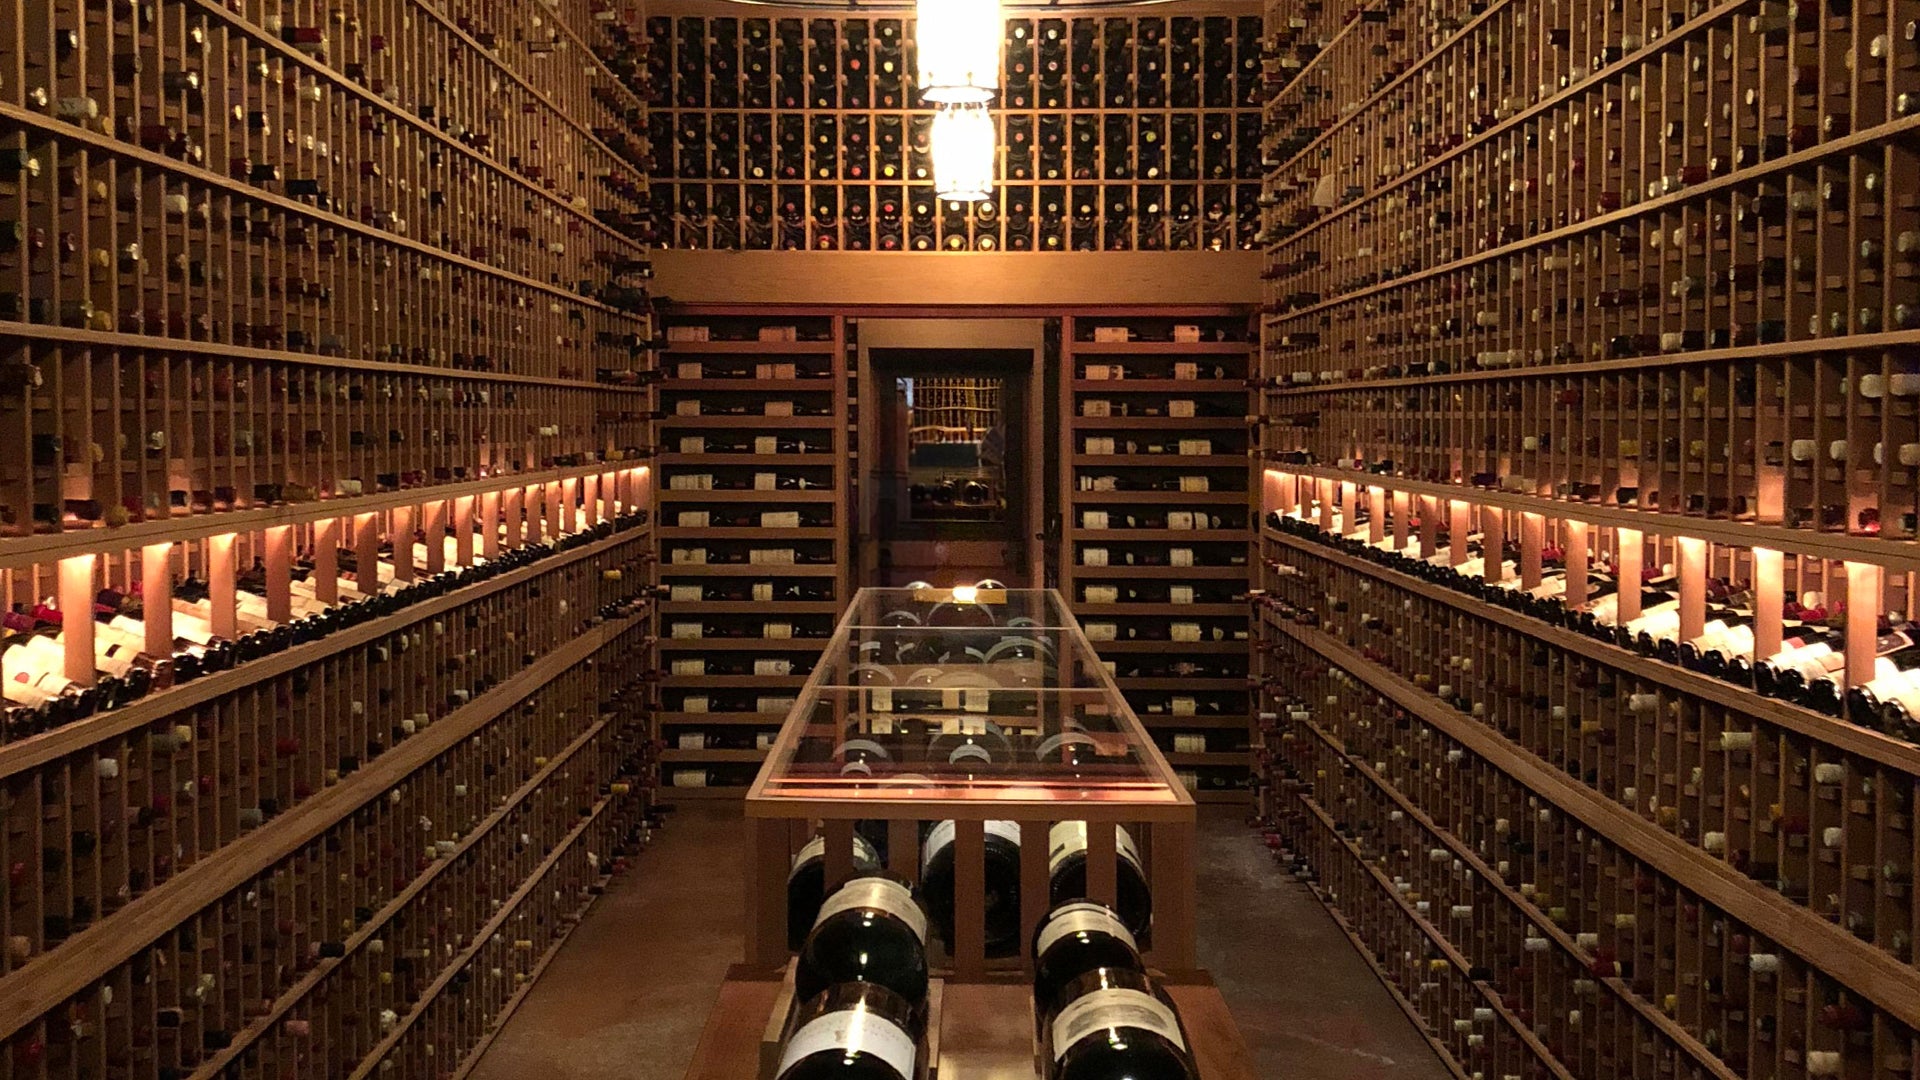 How to Build an Impressive Wine Collection?